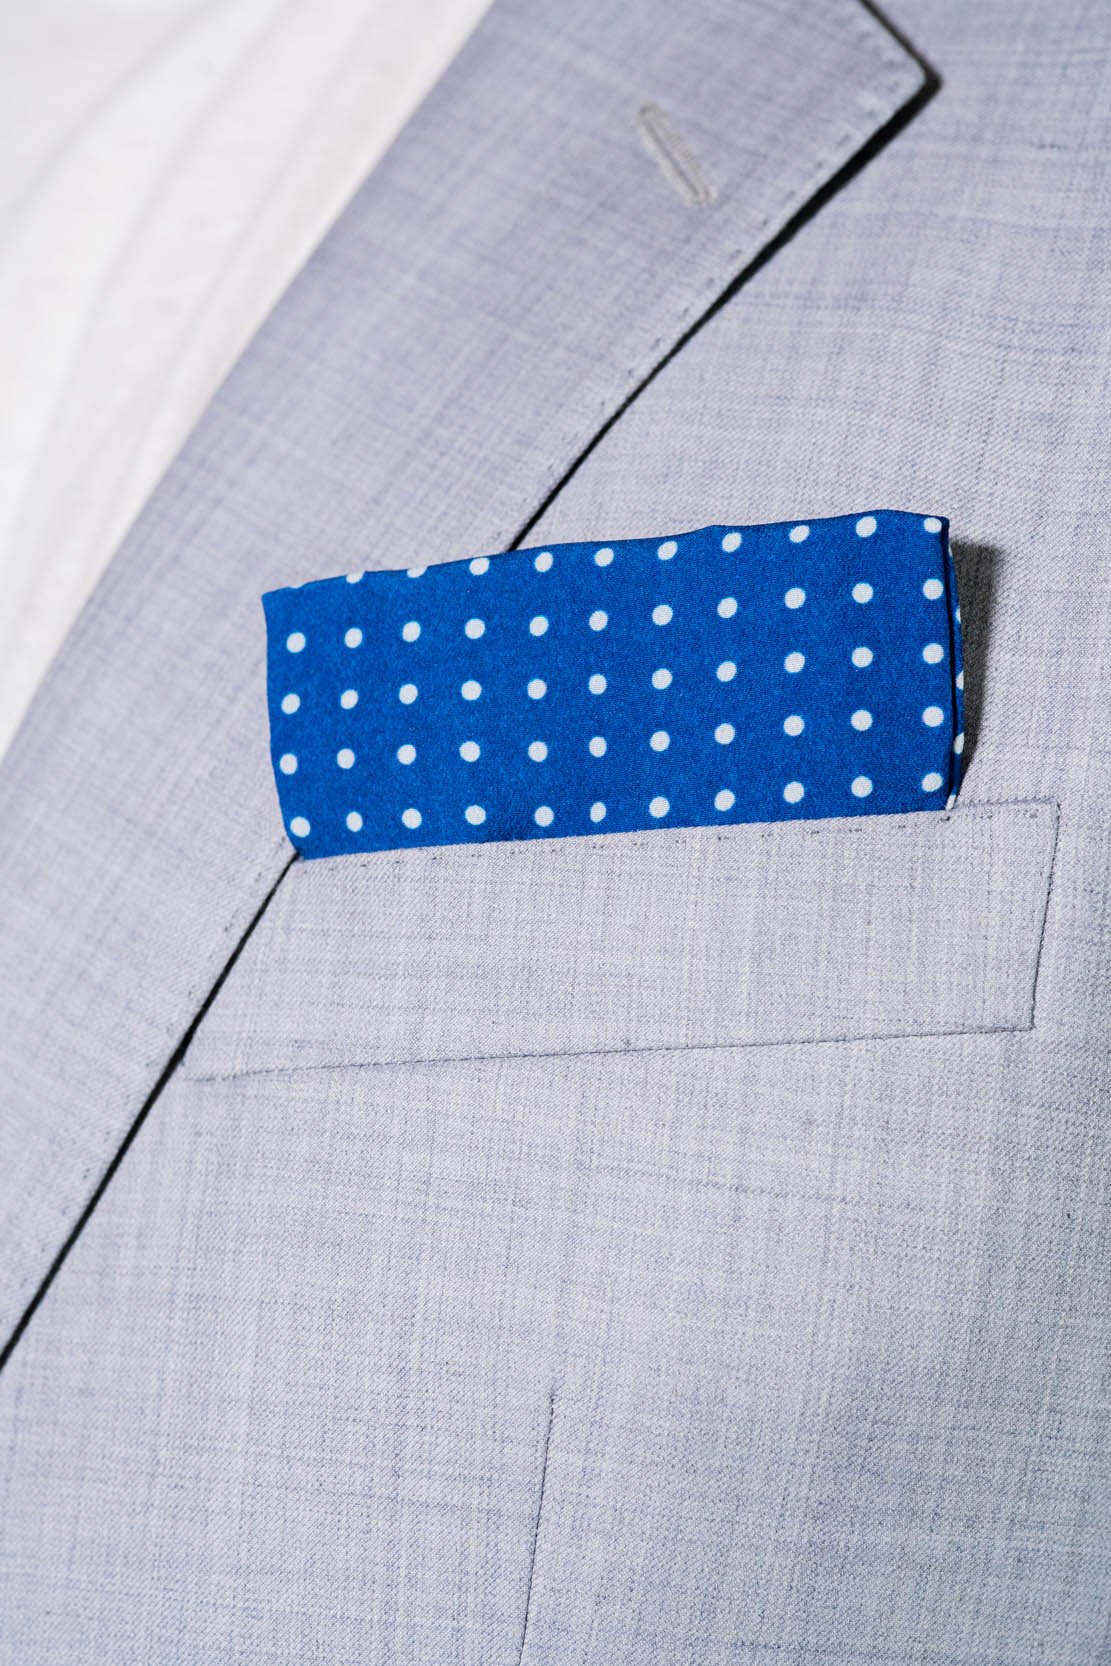 RARE CUT's Royal Dots Pocket Square Worn in a Suit